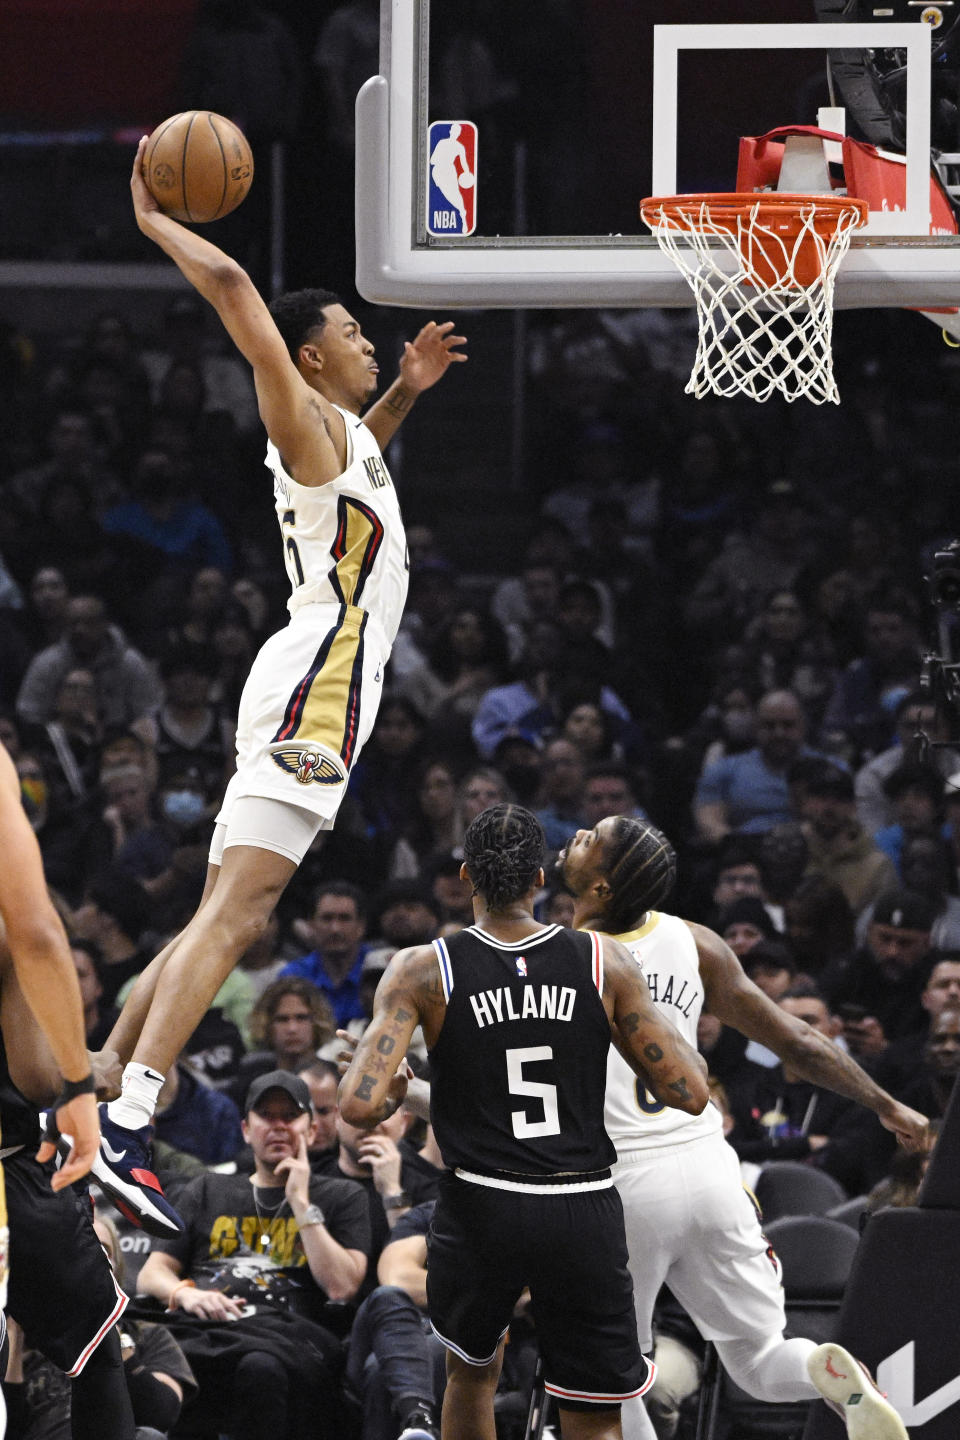 New Orleans Pelicans guard Trey Murphy III, left, dunks as Los Angeles Clippers guard Bones Hyland, center, and forward Naji Marshall watch during the first half of an NBA basketball game Saturday, March 25, 2023, in Los Angeles. (AP Photo/Mark J. Terrill)